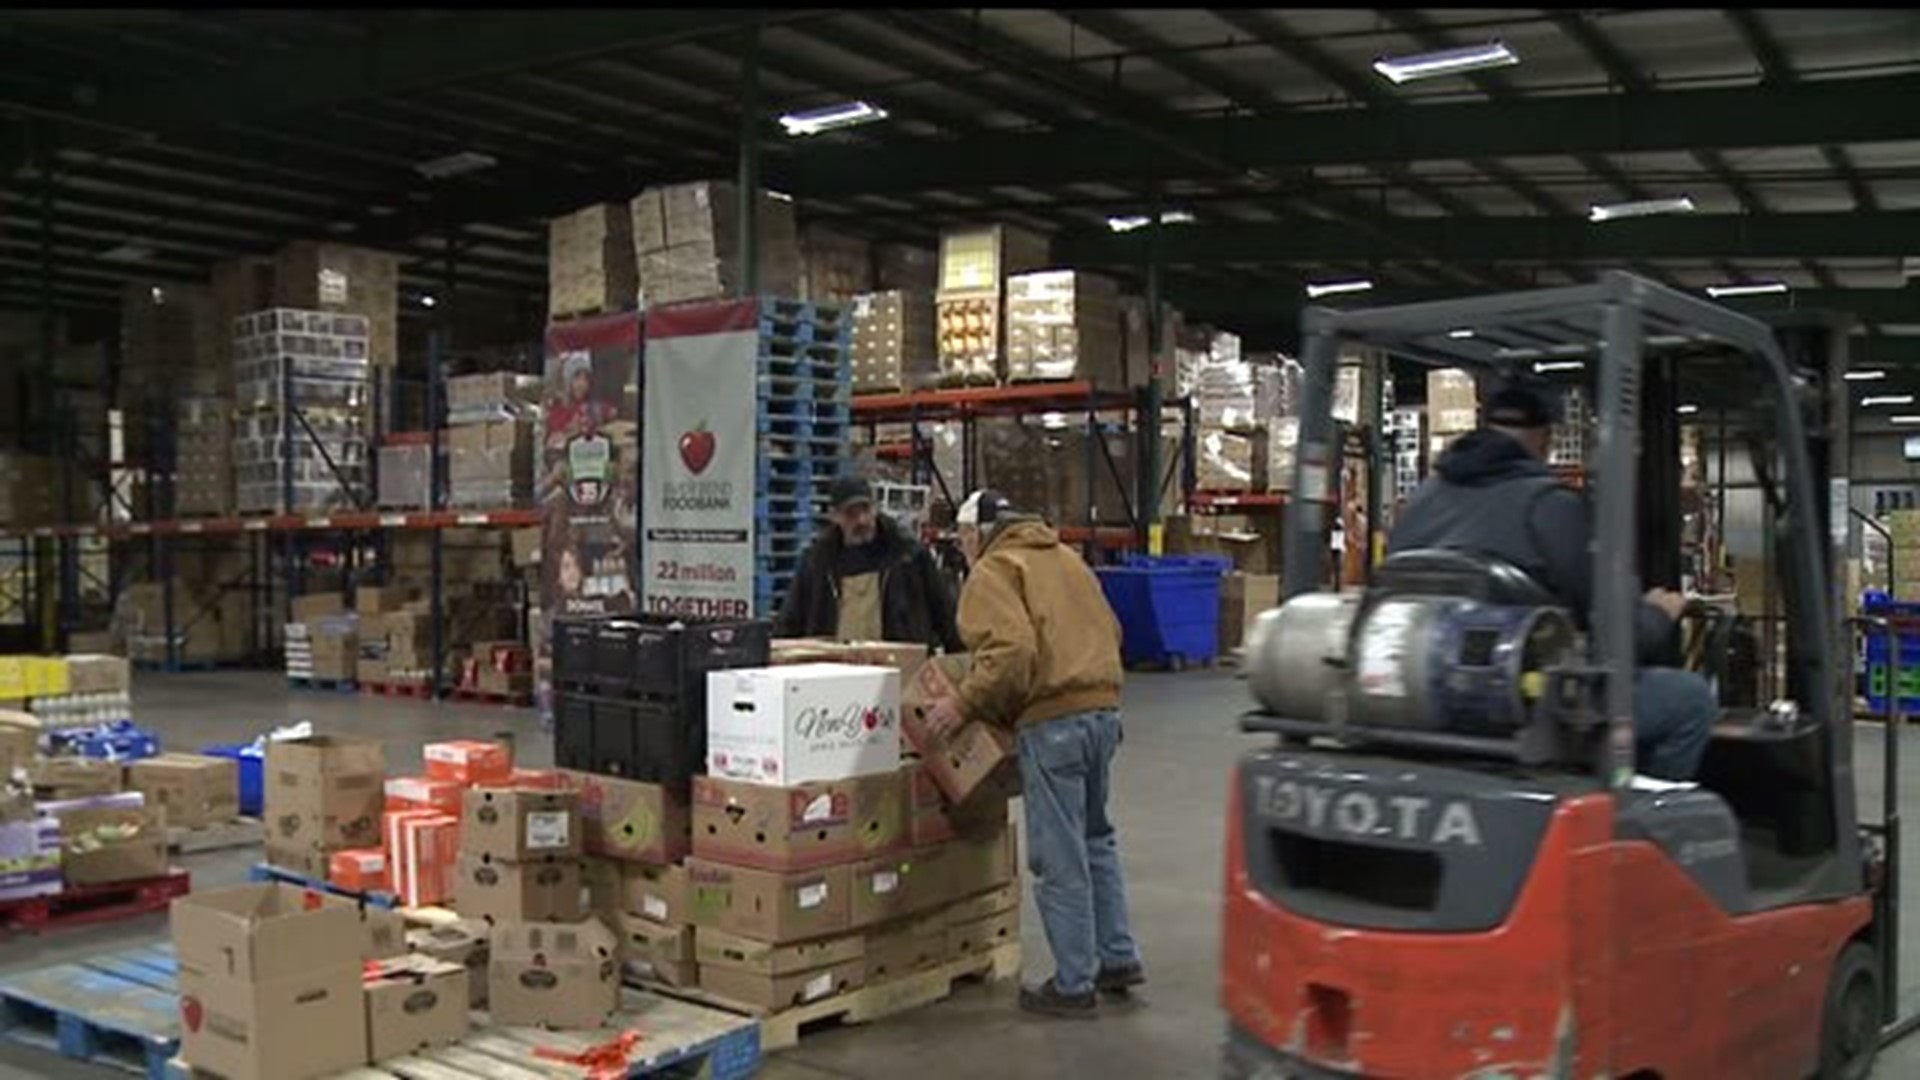 River Bend Foodbank announces push to end meal gap in Scott County